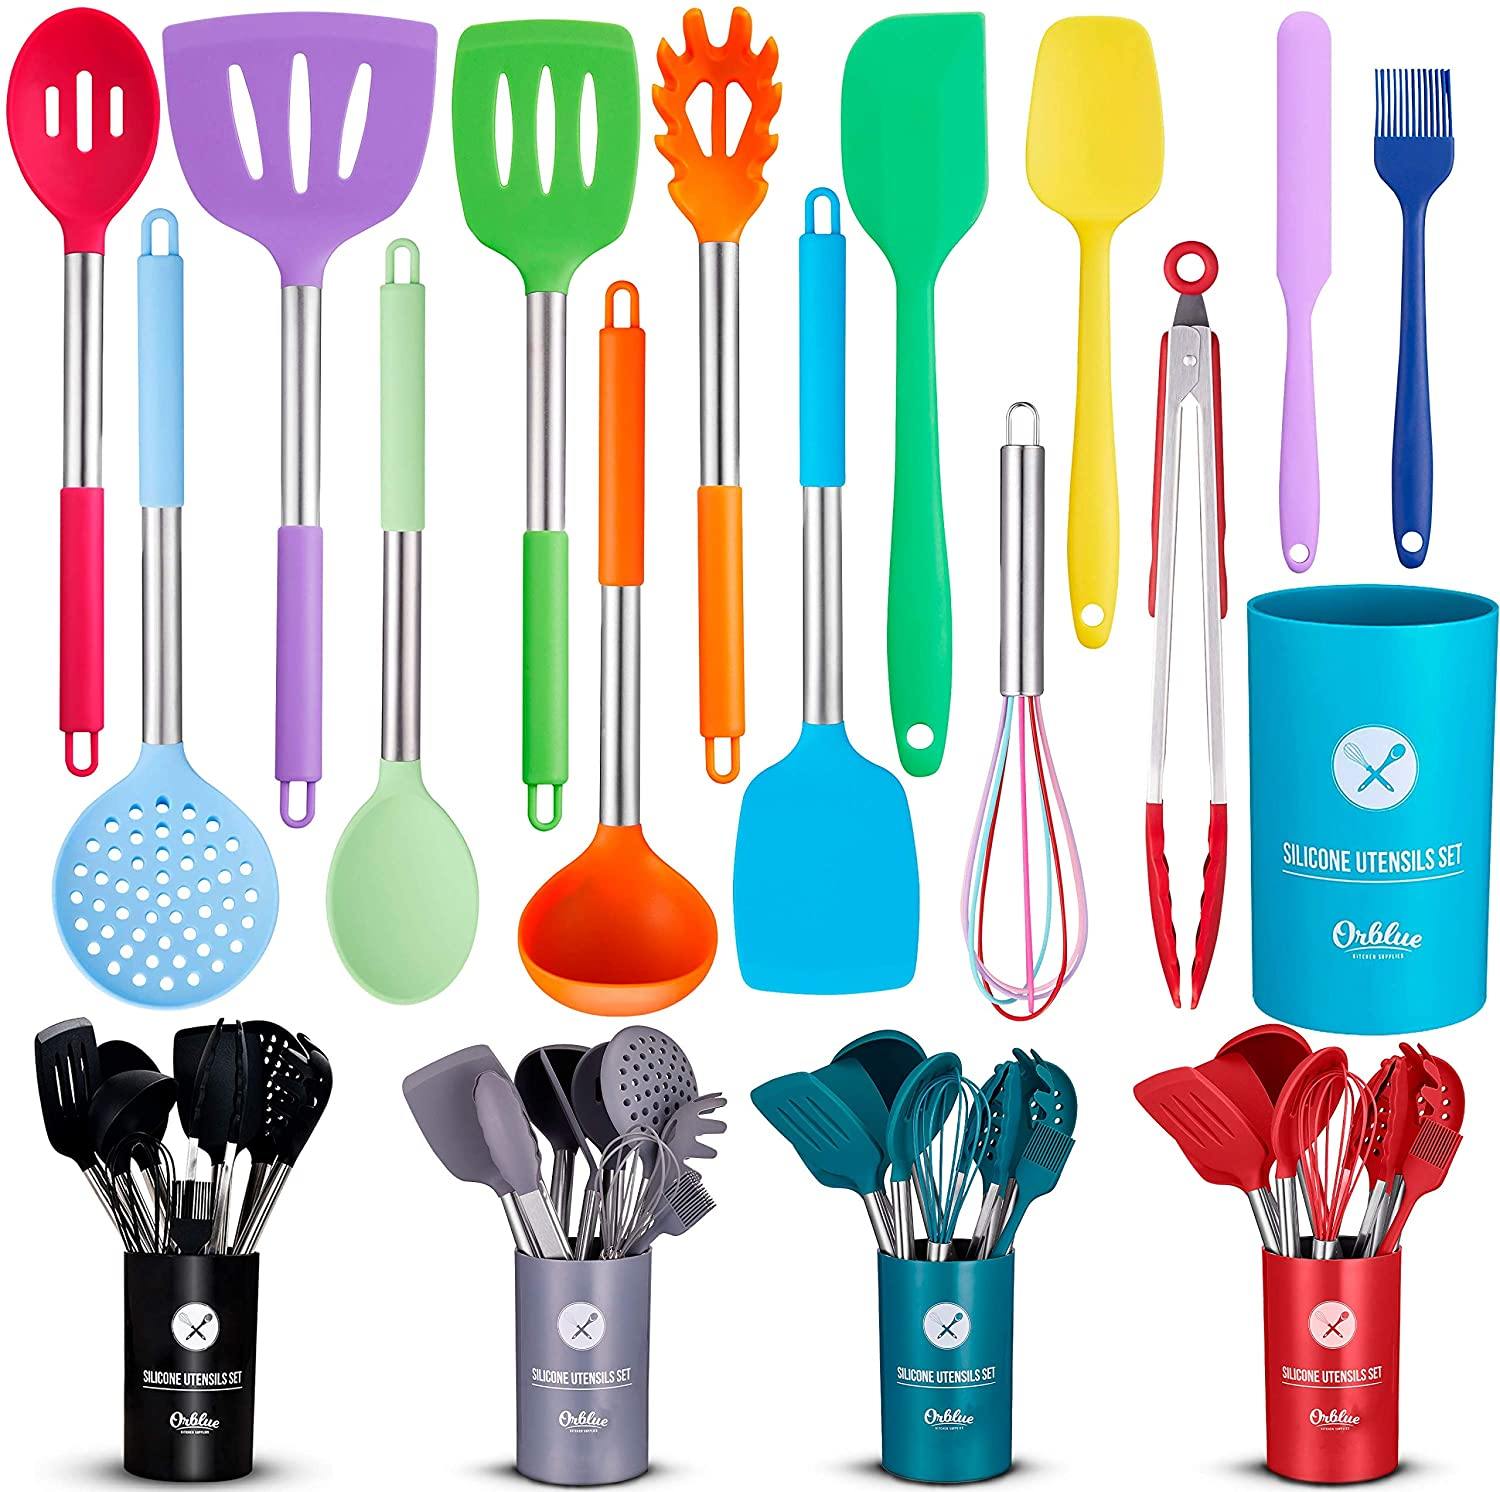 ORBLUE 14-piece Silicone Food-Grade Kitchen Utensil Set with Caddy for  Storage